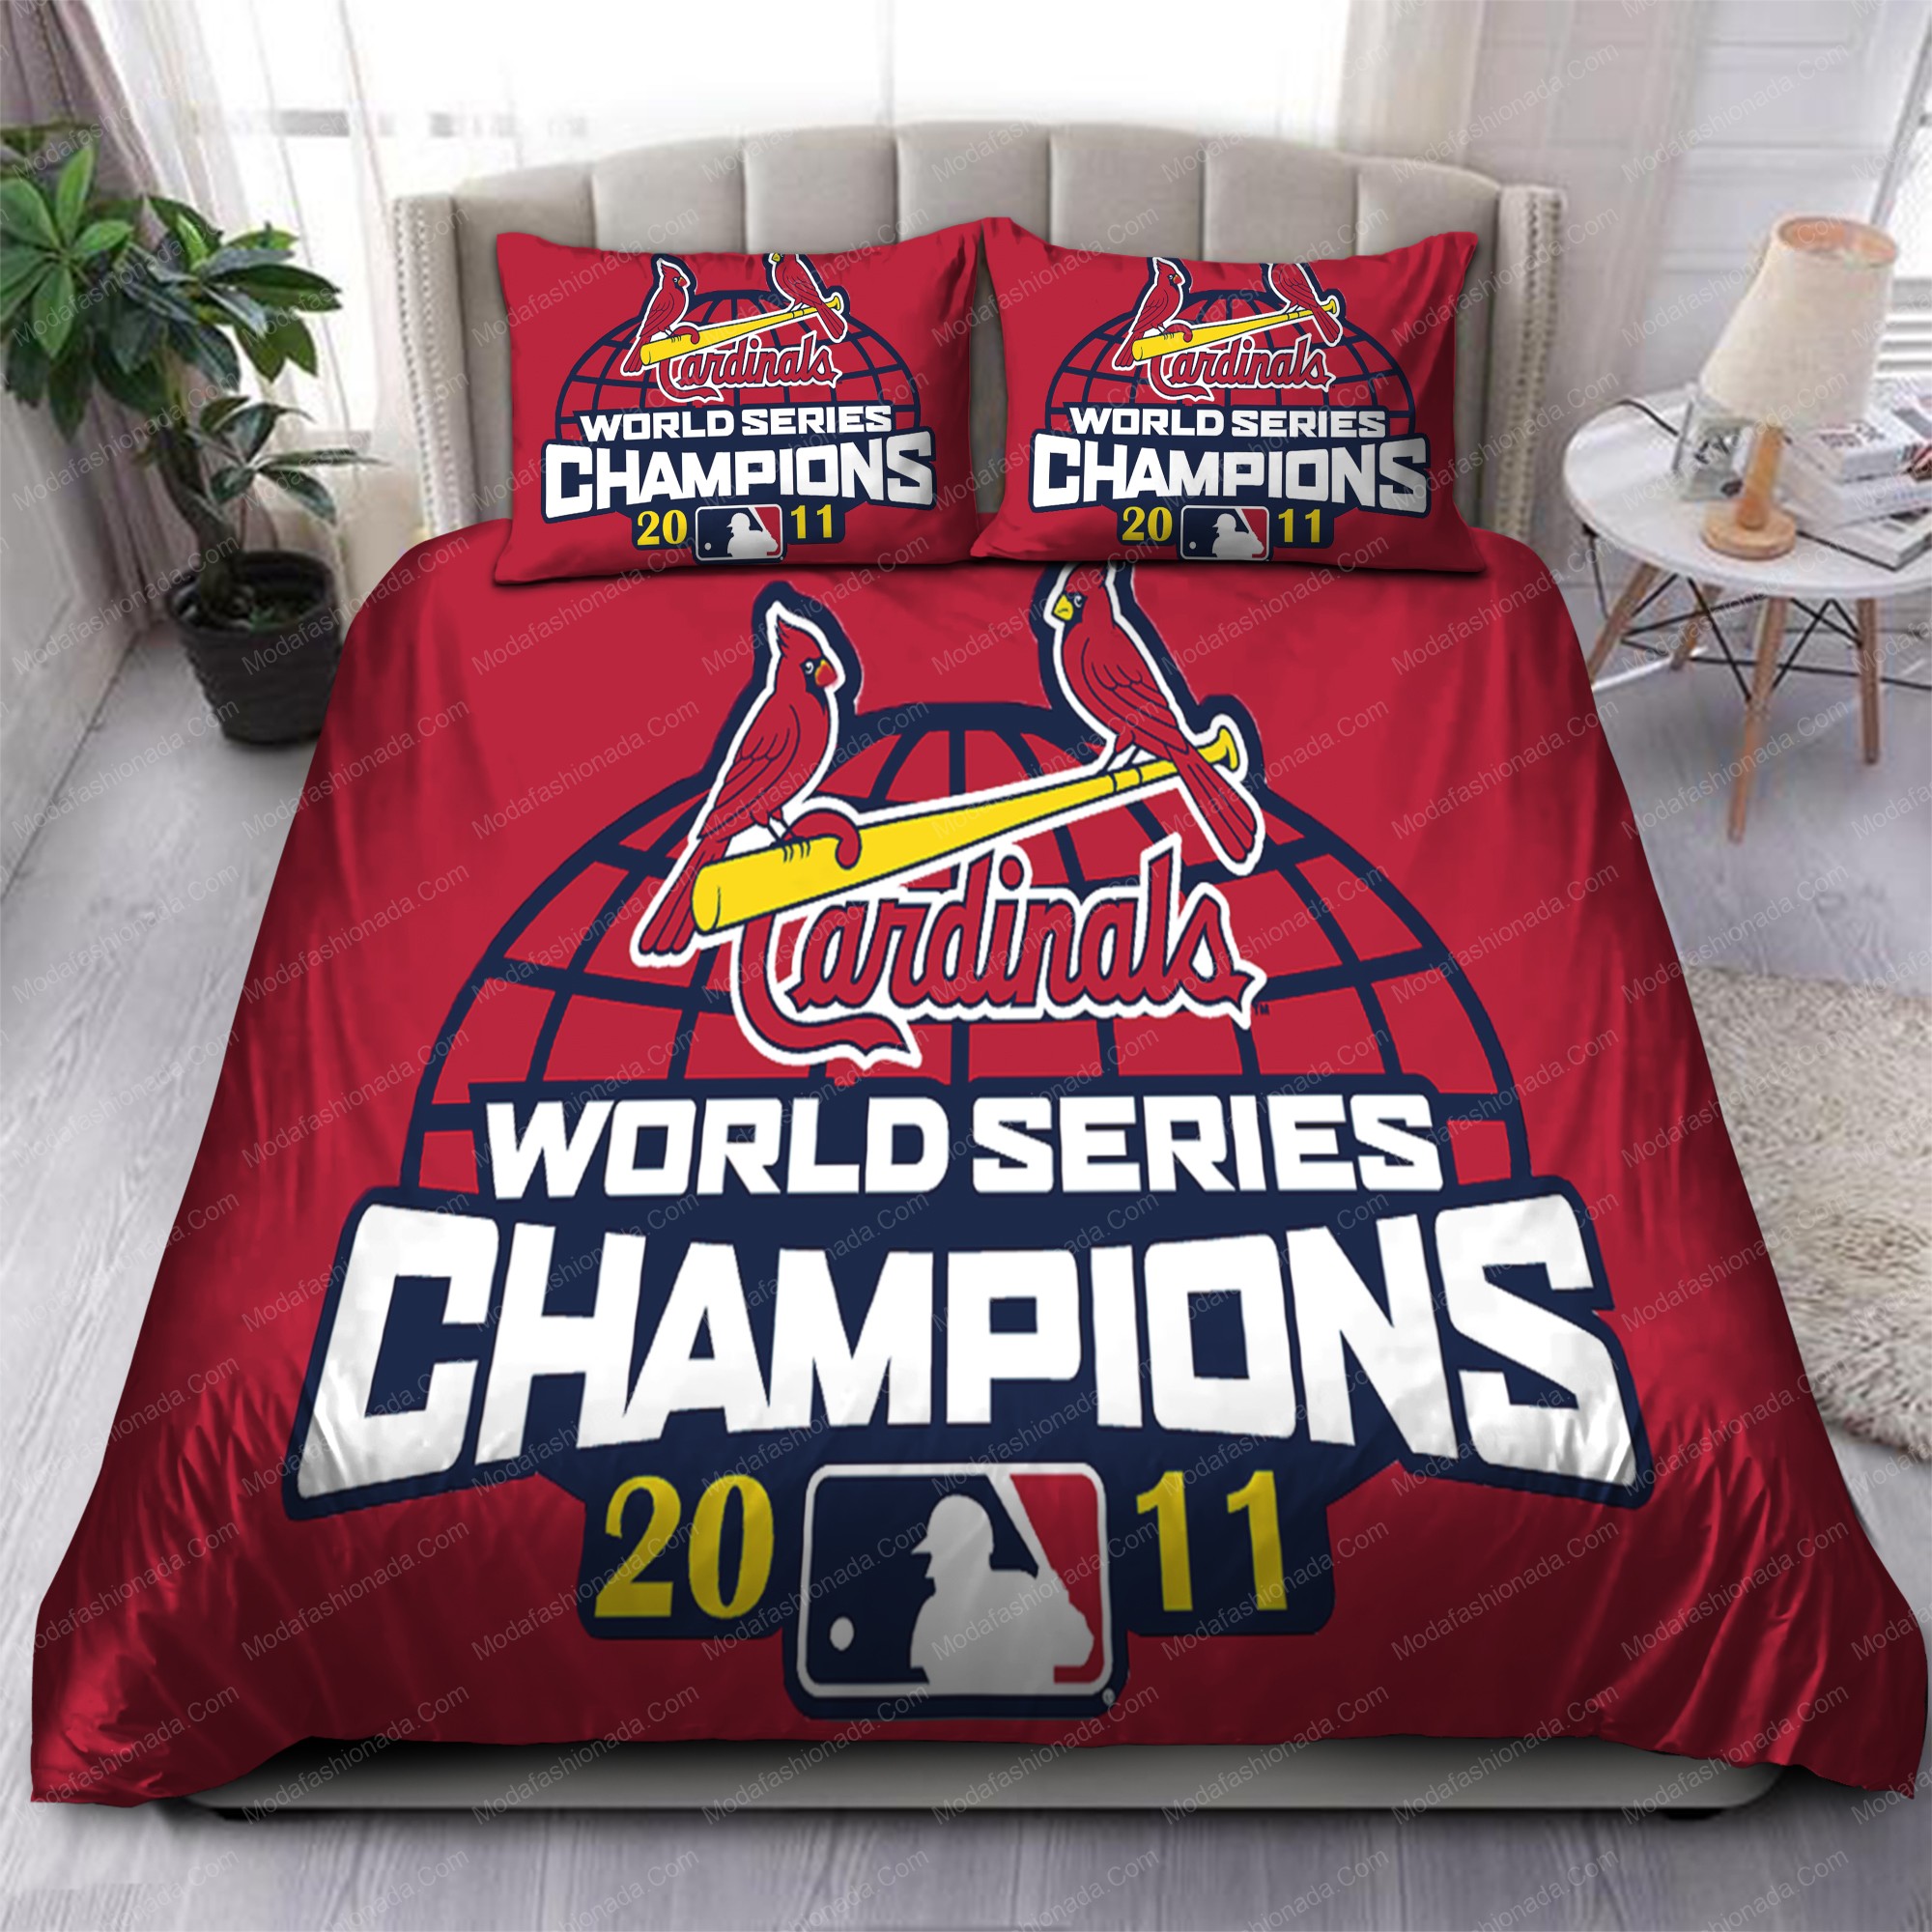 World Series Championships 2011 St Louis Cardinals Mlb 170 Logo Type 1296 Bedding Sets Sporty Bedroom Home Decor